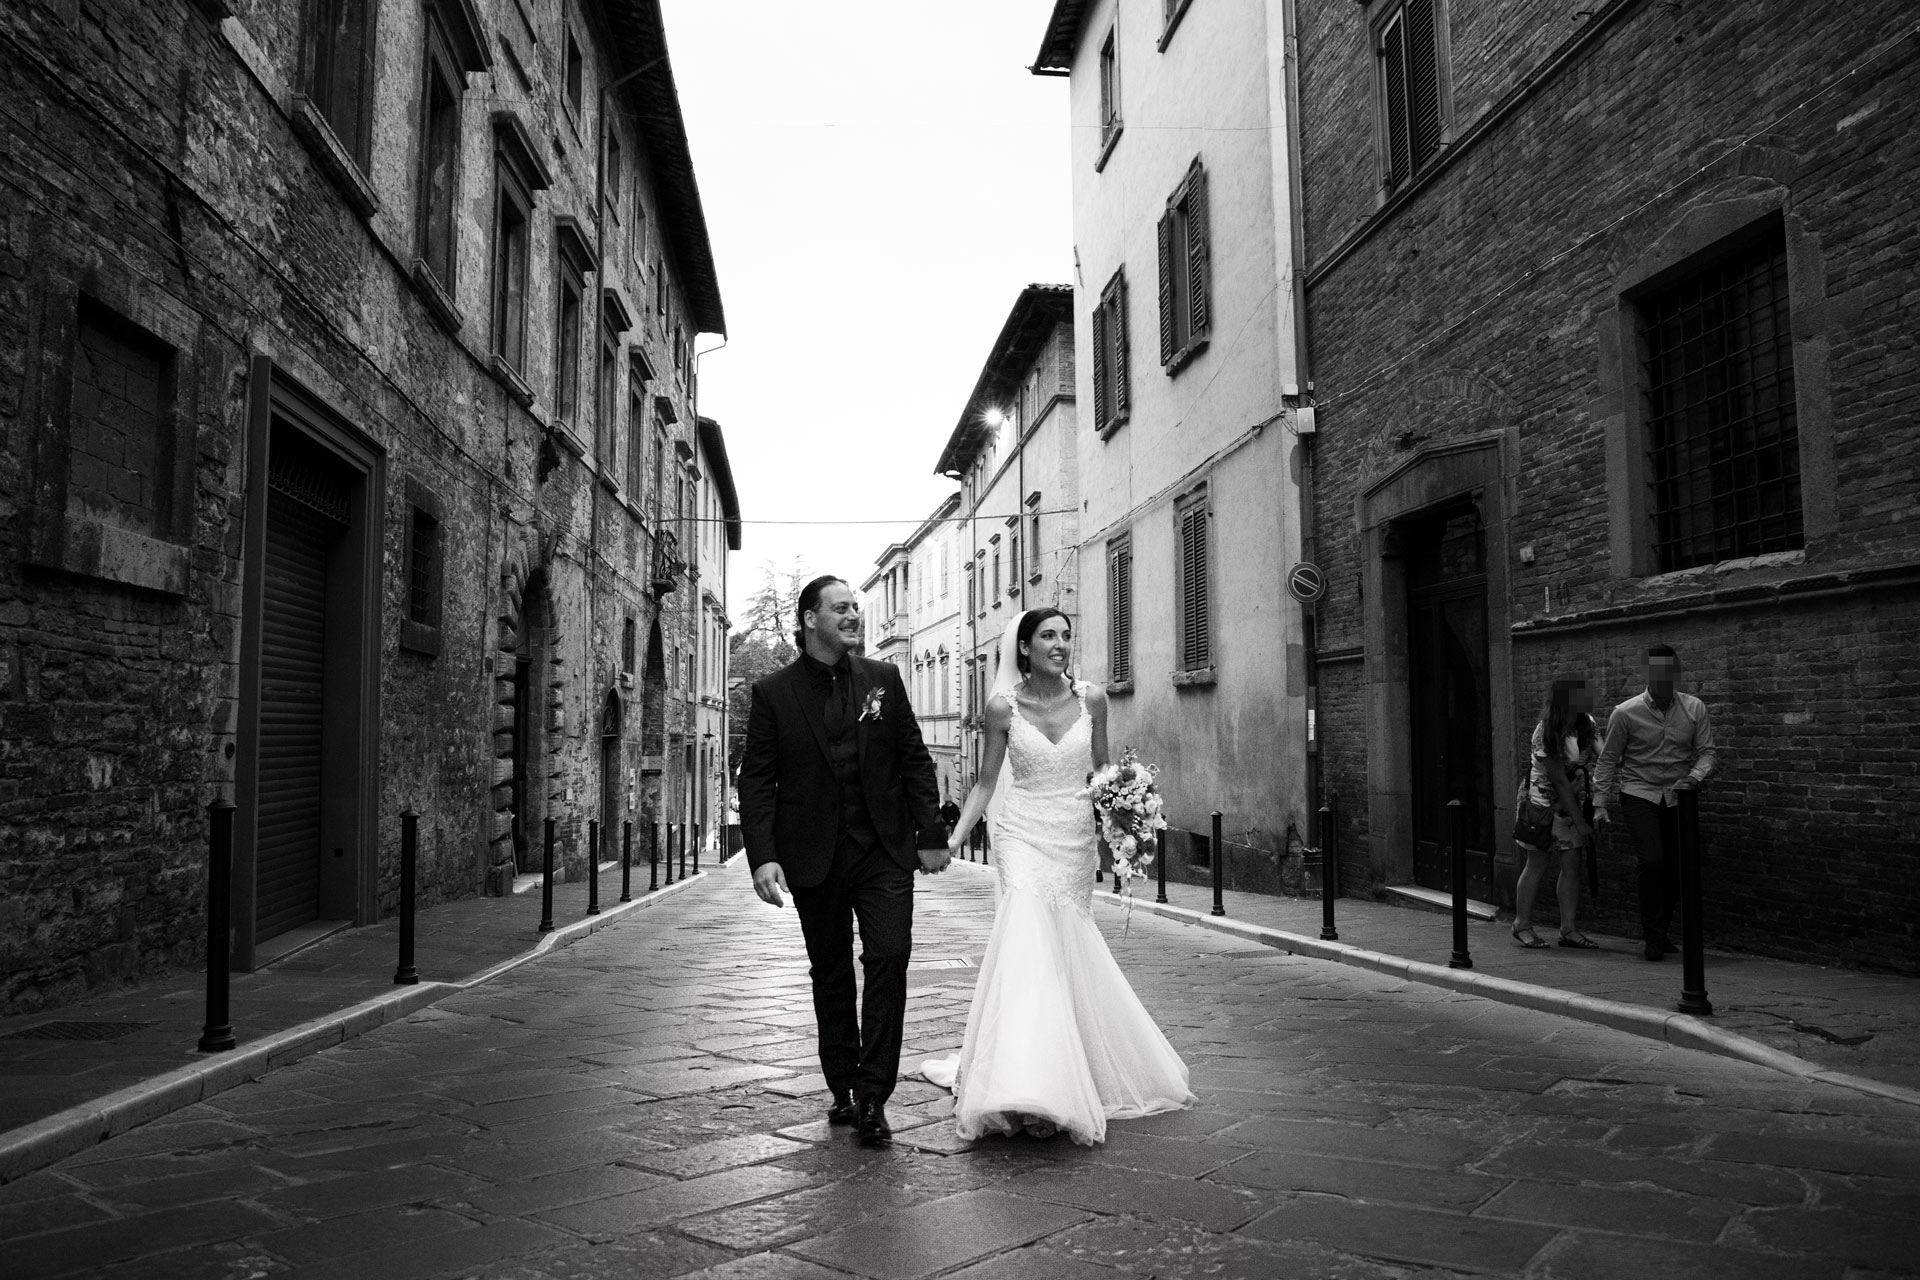 The Spouses stroll in Todi